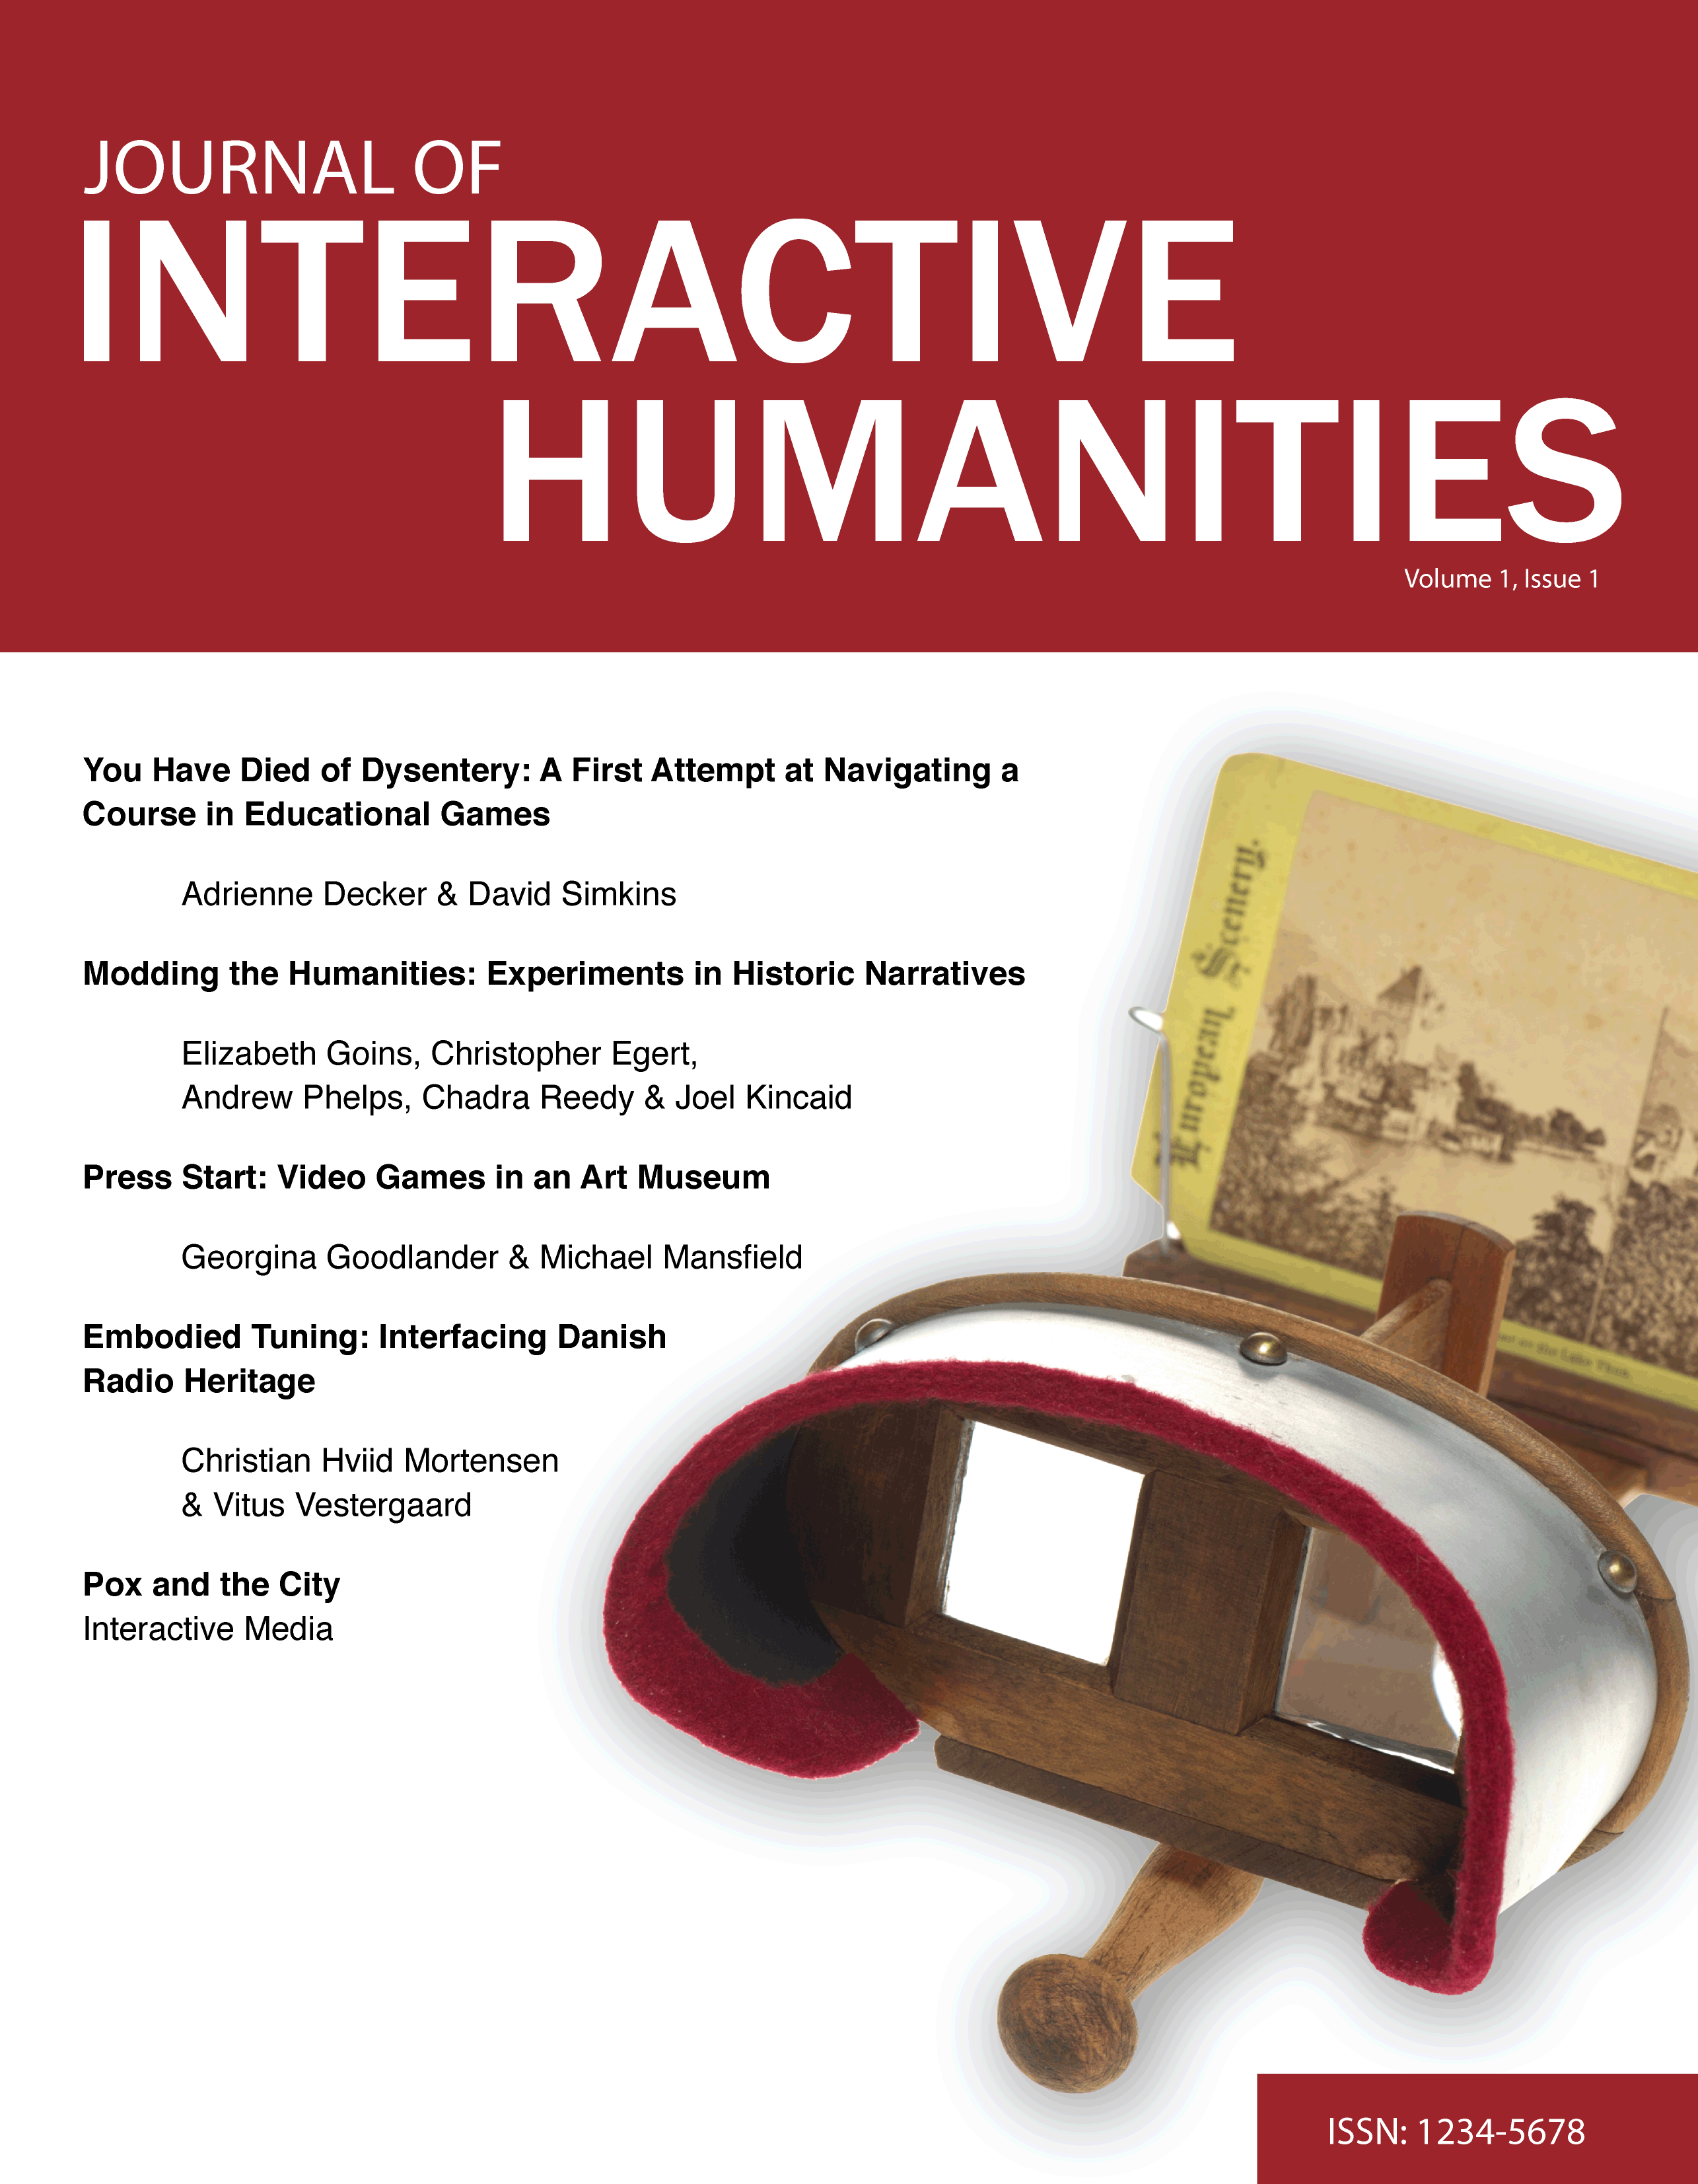 Cover for the Journal of Interactive Humanities